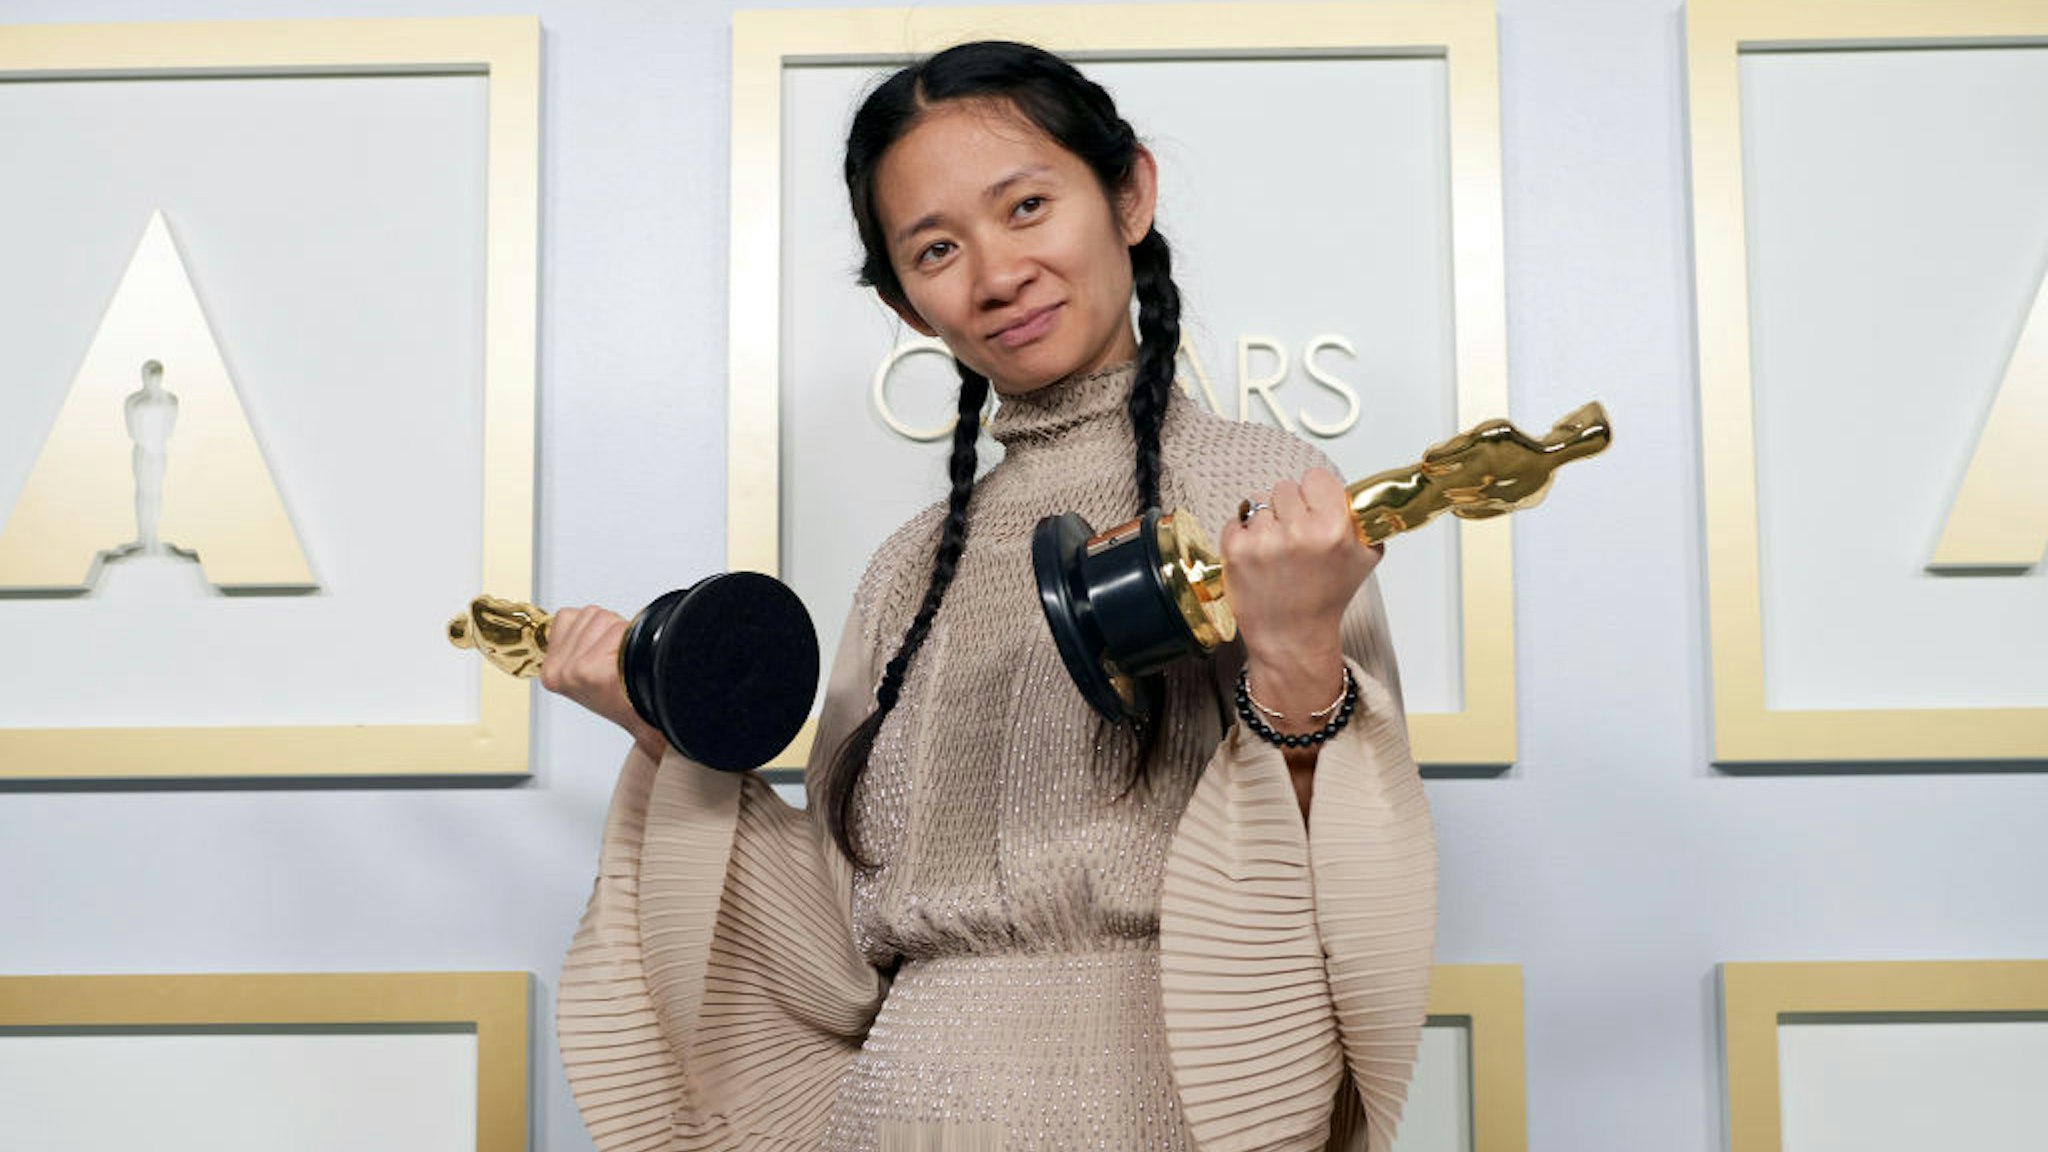 LOS ANGELES, CALIFORNIA – APRIL 25: (EDITORIAL USE ONLY) In this handout photo provided by A.M.P.A.S., Chloé Zhao, winner of the Best Director for 'Nomadland,' poses in the press room during the 93rd Annual Academy Awards at Union Station on April 25, 2021 in Los Angeles, California. (Photo by Matt Petit/A.M.P.A.S. via Getty Images)